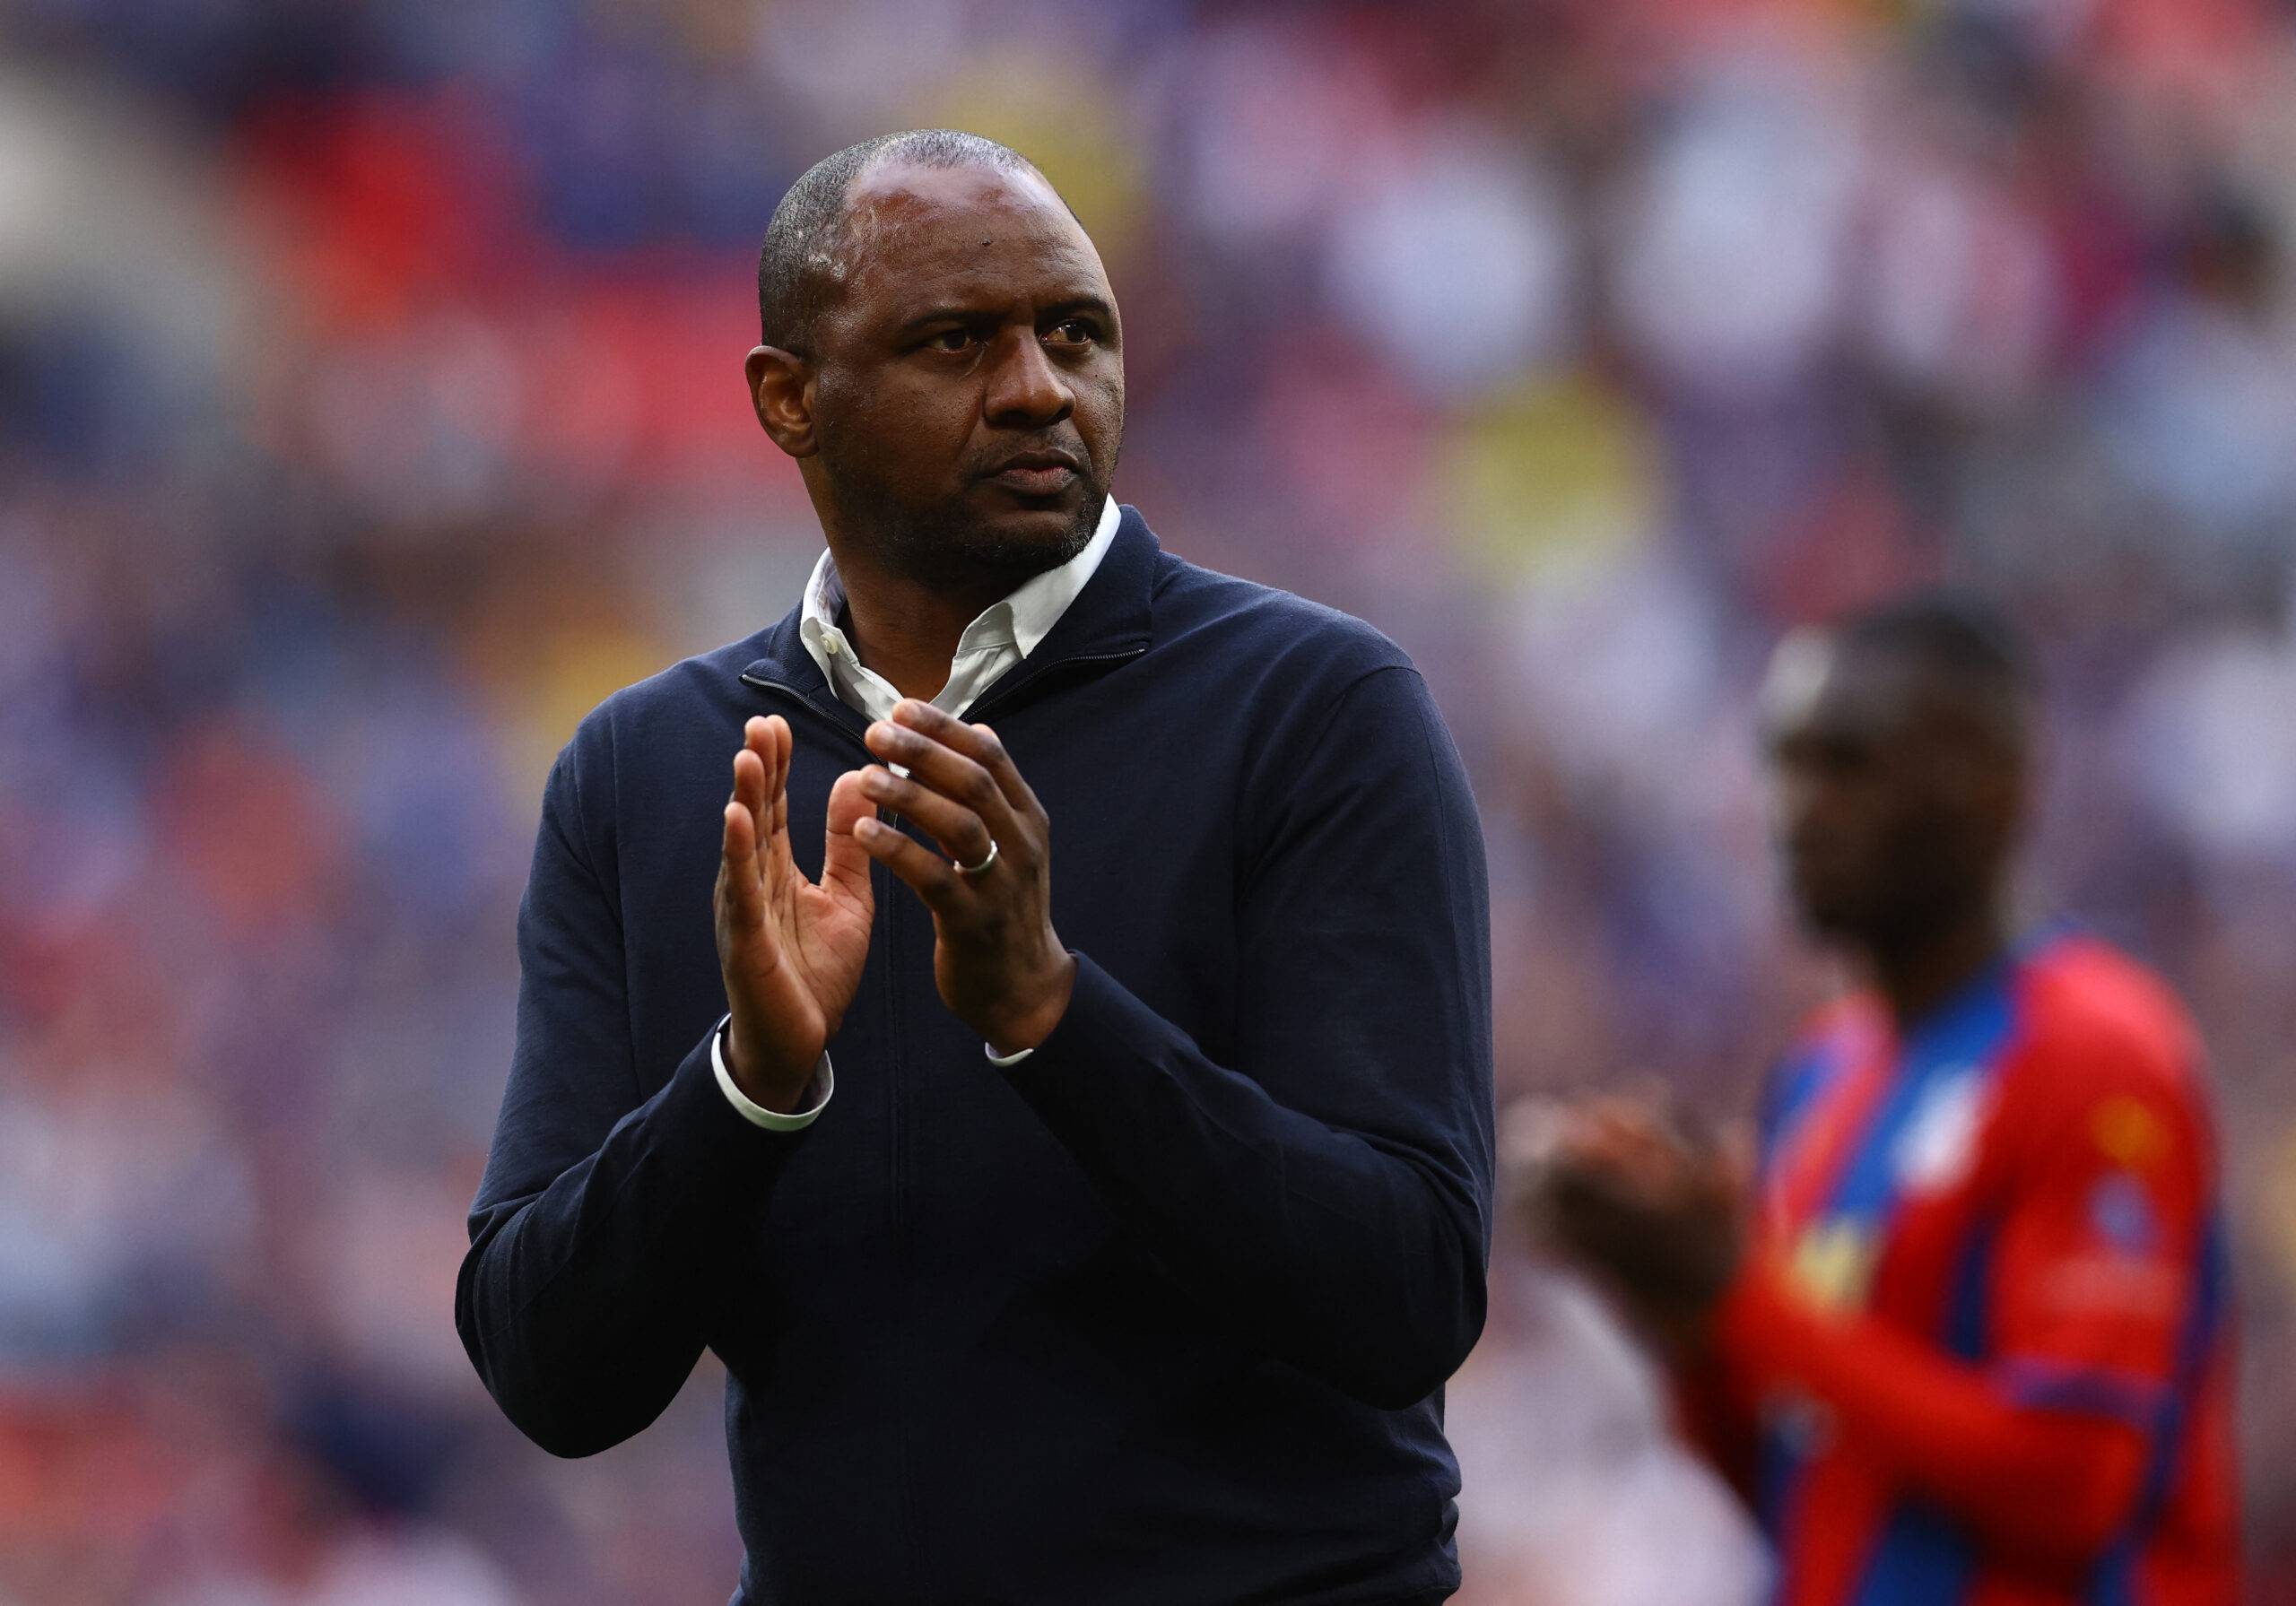 Crystal Palace manager Patrick Vieira clapping the club's fans